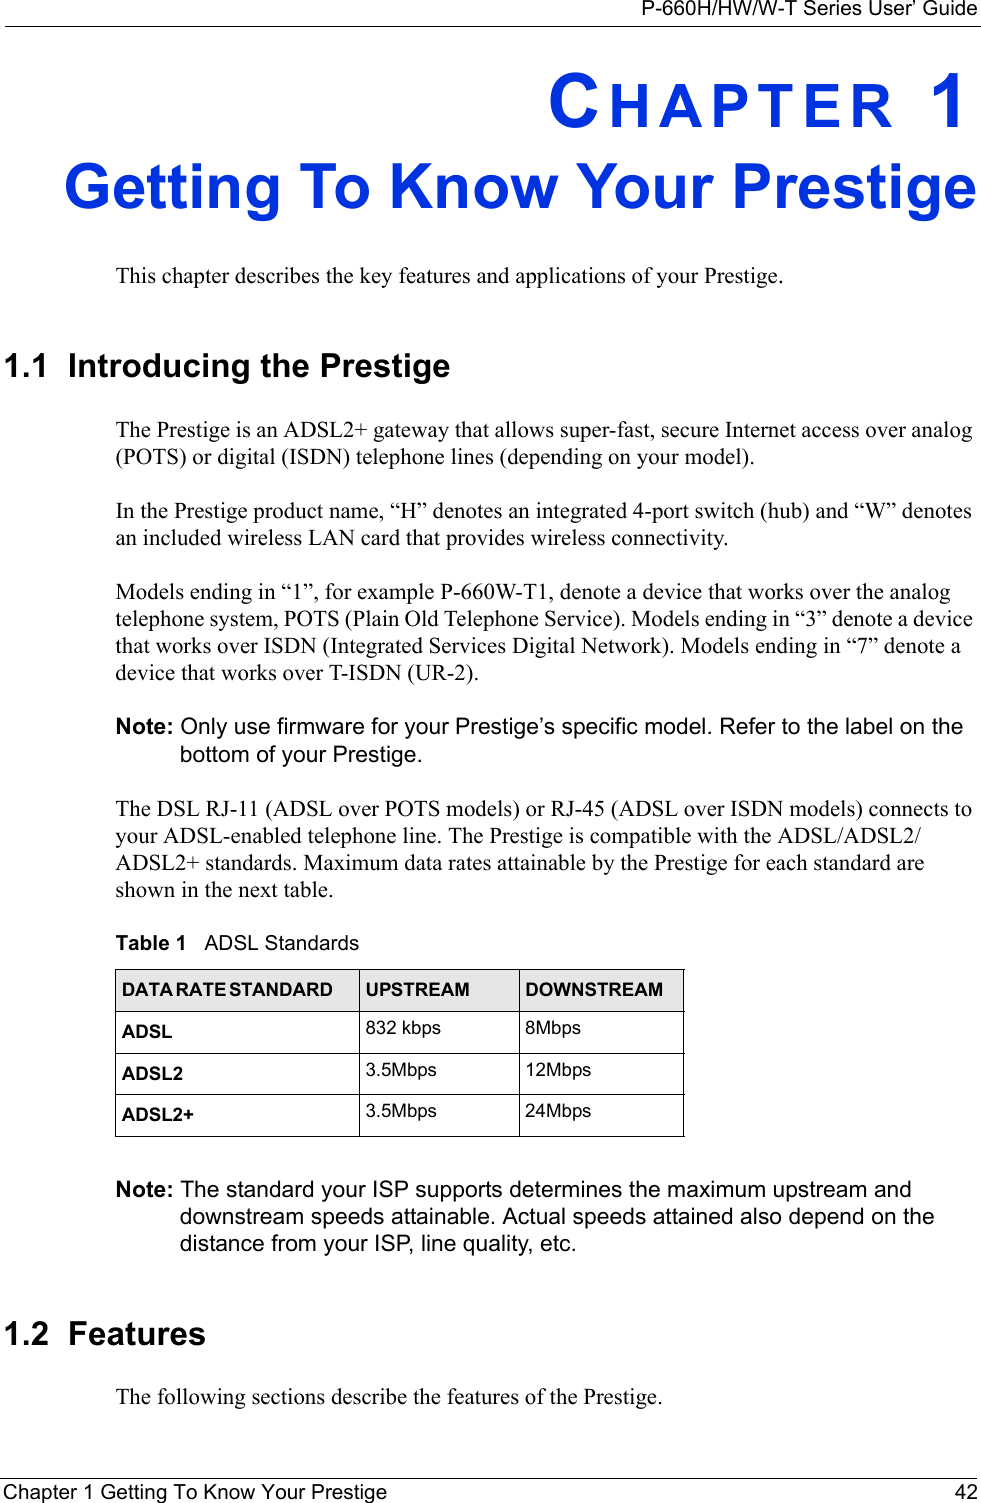 P-660H/HW/W-T Series User’ GuideChapter 1 Getting To Know Your Prestige 42CHAPTER 1Getting To Know Your PrestigeThis chapter describes the key features and applications of your Prestige.1.1  Introducing the Prestige The Prestige is an ADSL2+ gateway that allows super-fast, secure Internet access over analog (POTS) or digital (ISDN) telephone lines (depending on your model). In the Prestige product name, “H” denotes an integrated 4-port switch (hub) and “W” denotes an included wireless LAN card that provides wireless connectivity. Models ending in “1”, for example P-660W-T1, denote a device that works over the analog telephone system, POTS (Plain Old Telephone Service). Models ending in “3” denote a device that works over ISDN (Integrated Services Digital Network). Models ending in “7” denote a device that works over T-ISDN (UR-2).Note: Only use firmware for your Prestige’s specific model. Refer to the label on the bottom of your Prestige.The DSL RJ-11 (ADSL over POTS models) or RJ-45 (ADSL over ISDN models) connects to your ADSL-enabled telephone line. The Prestige is compatible with the ADSL/ADSL2/ADSL2+ standards. Maximum data rates attainable by the Prestige for each standard are shown in the next table.Note: The standard your ISP supports determines the maximum upstream and downstream speeds attainable. Actual speeds attained also depend on the distance from your ISP, line quality, etc.1.2  Features  The following sections describe the features of the Prestige. Table 1   ADSL StandardsDATA RATE STANDARD         UPSTREAM DOWNSTREAMADSL 832 kbps 8MbpsADSL2 3.5Mbps 12MbpsADSL2+ 3.5Mbps 24Mbps